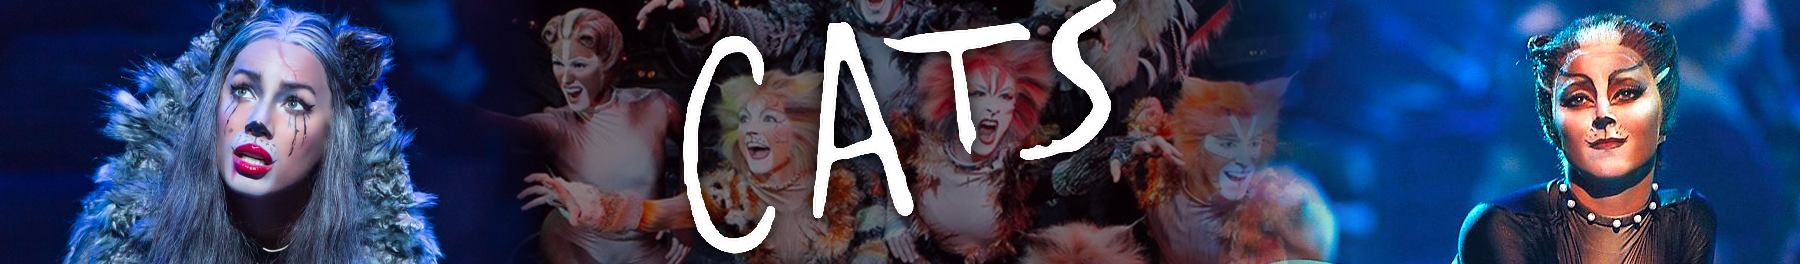 Cats Broadway Show